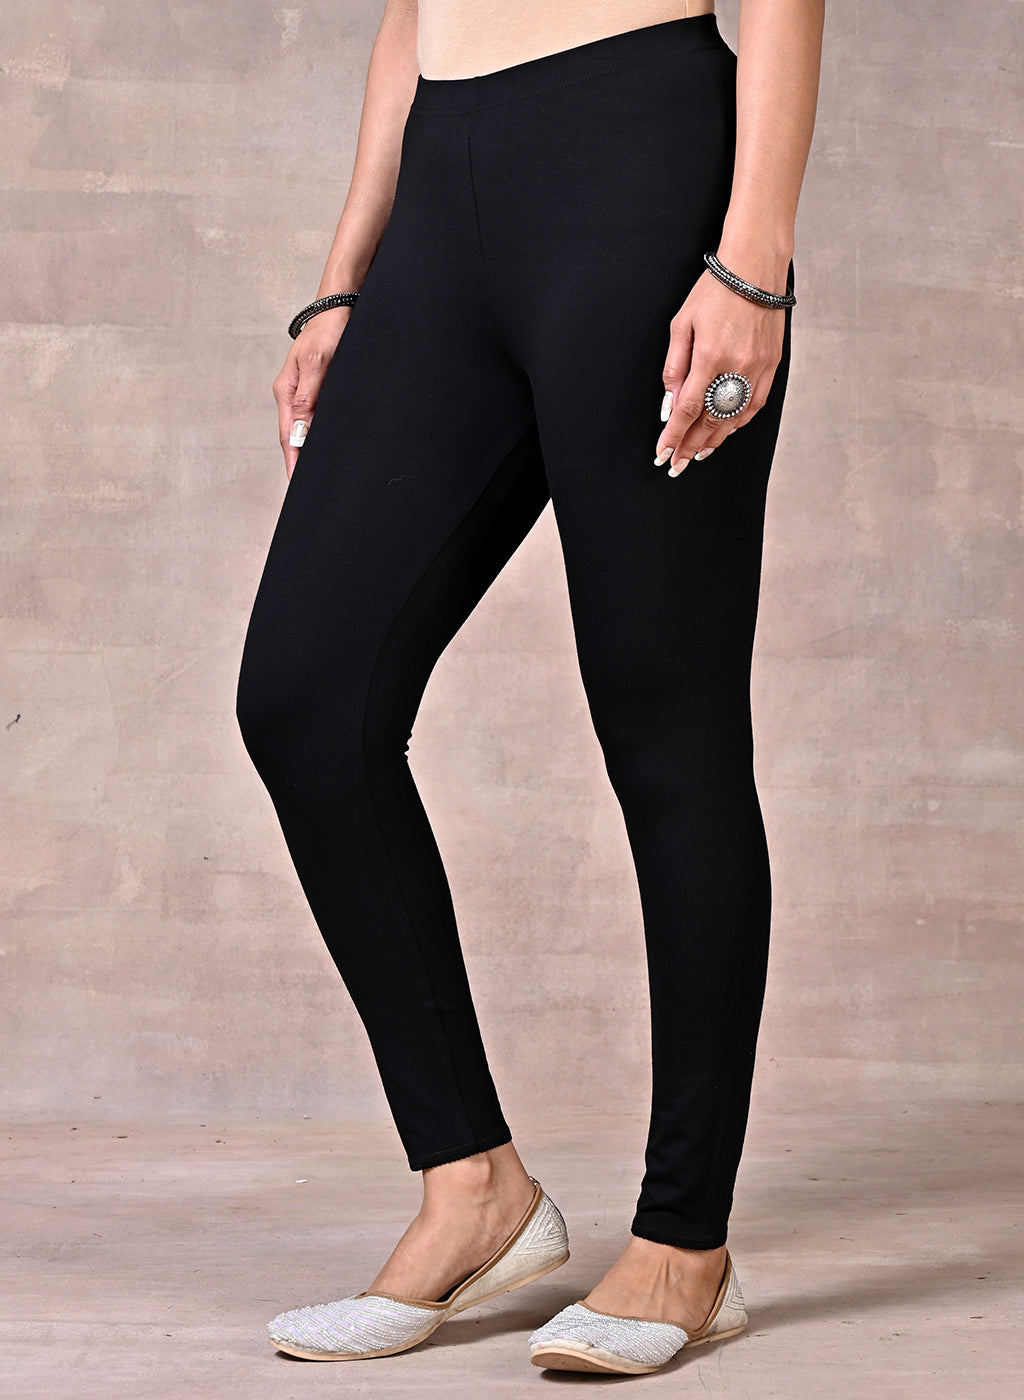 Women's Cotton Stretch Ankle Length Slim Fold-Over Tight Leggings // Solid  (Black), Size: M 